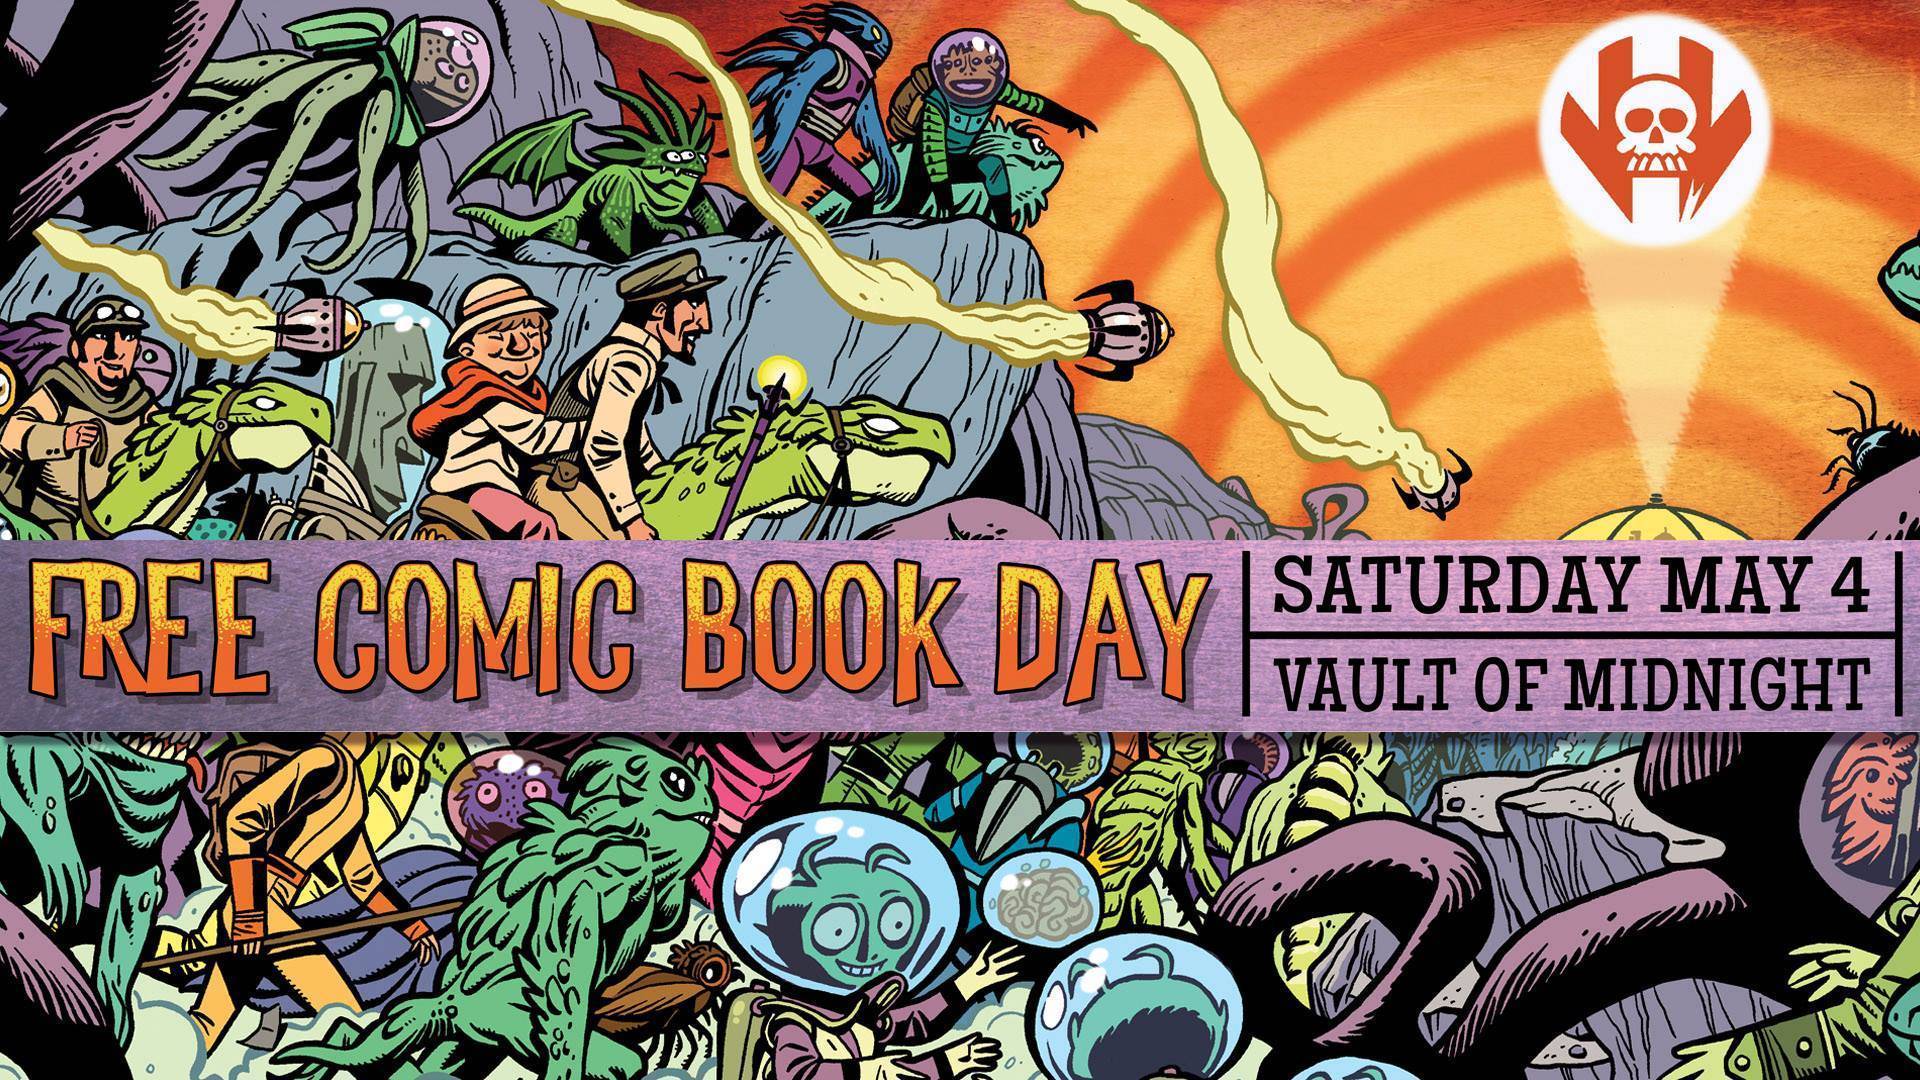 Vault of Midnight - Free Comic Book Day 2019 - Poster Design - Anthony Carpenter